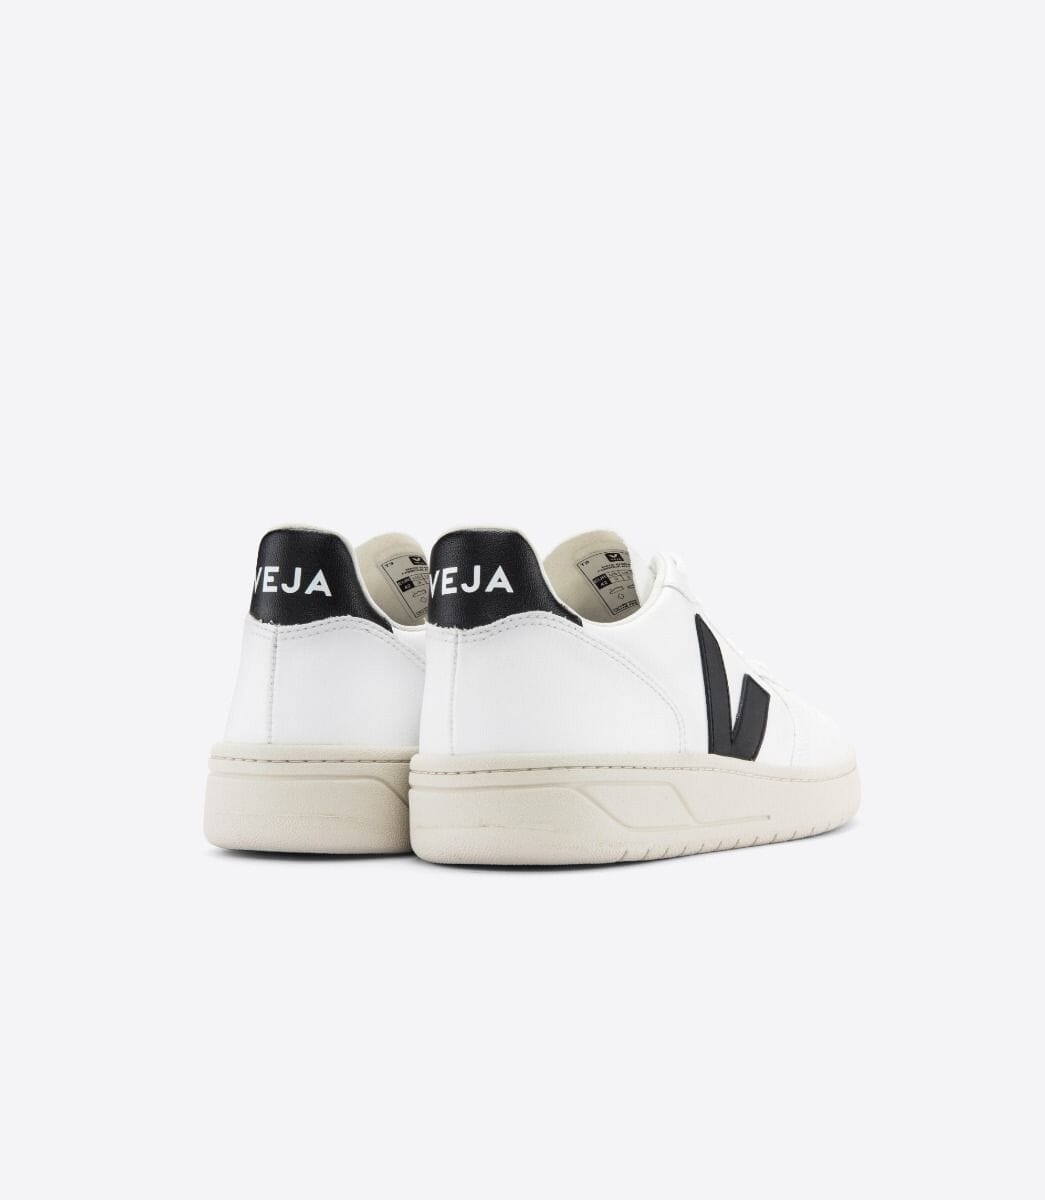 Veja M's V-10 CWL - Cotton Worked as Leather White Black Shoes